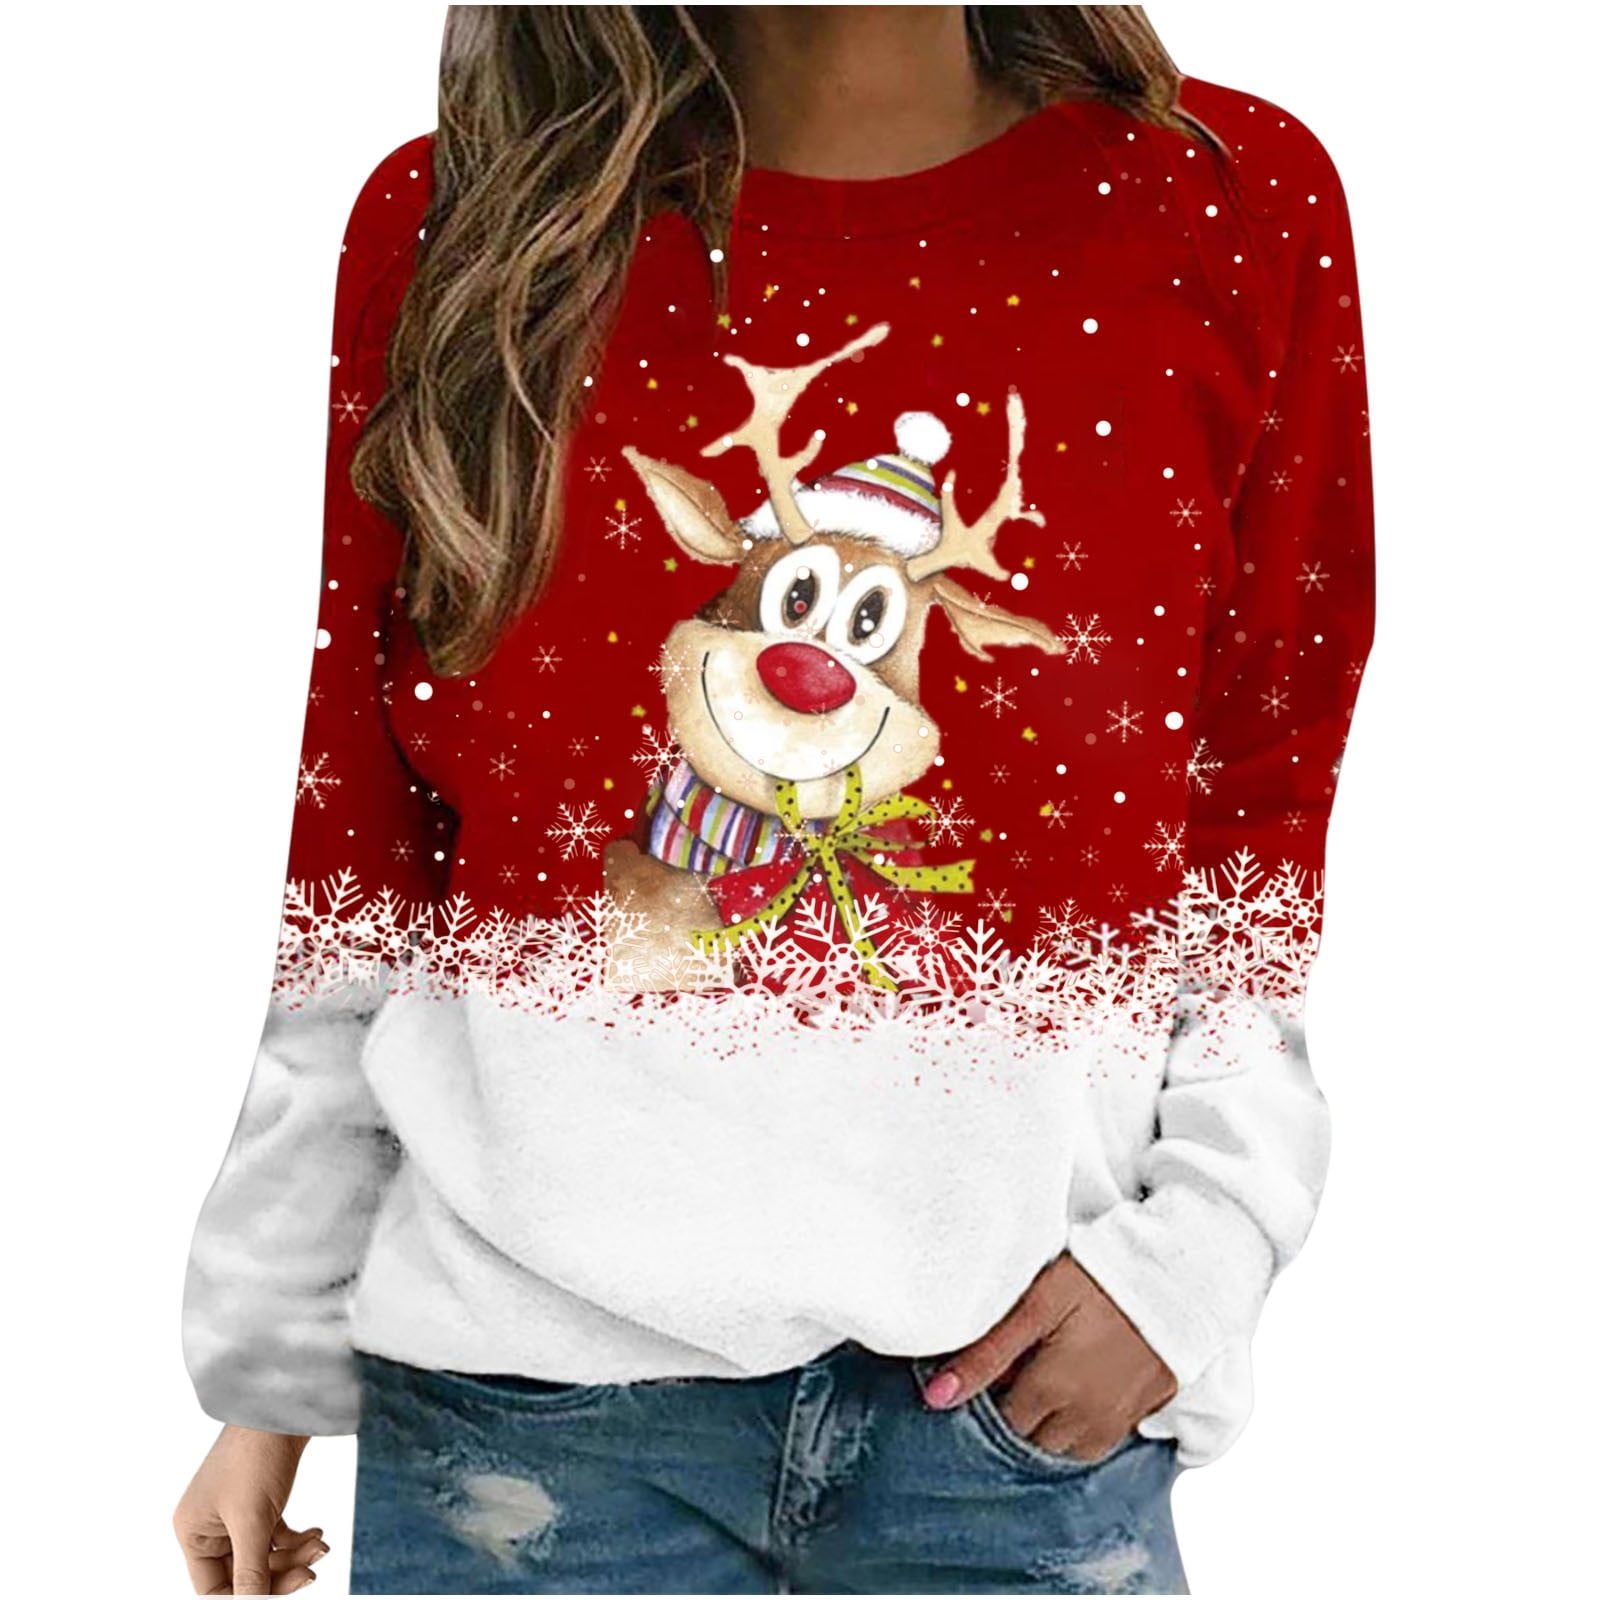 Christmas Tree Pullover Tops for Women Crew Neck Long Sleeve Casual Loose  Sweatshirts Cute Festivals Gifts for Ladies(Orange,XXXL)